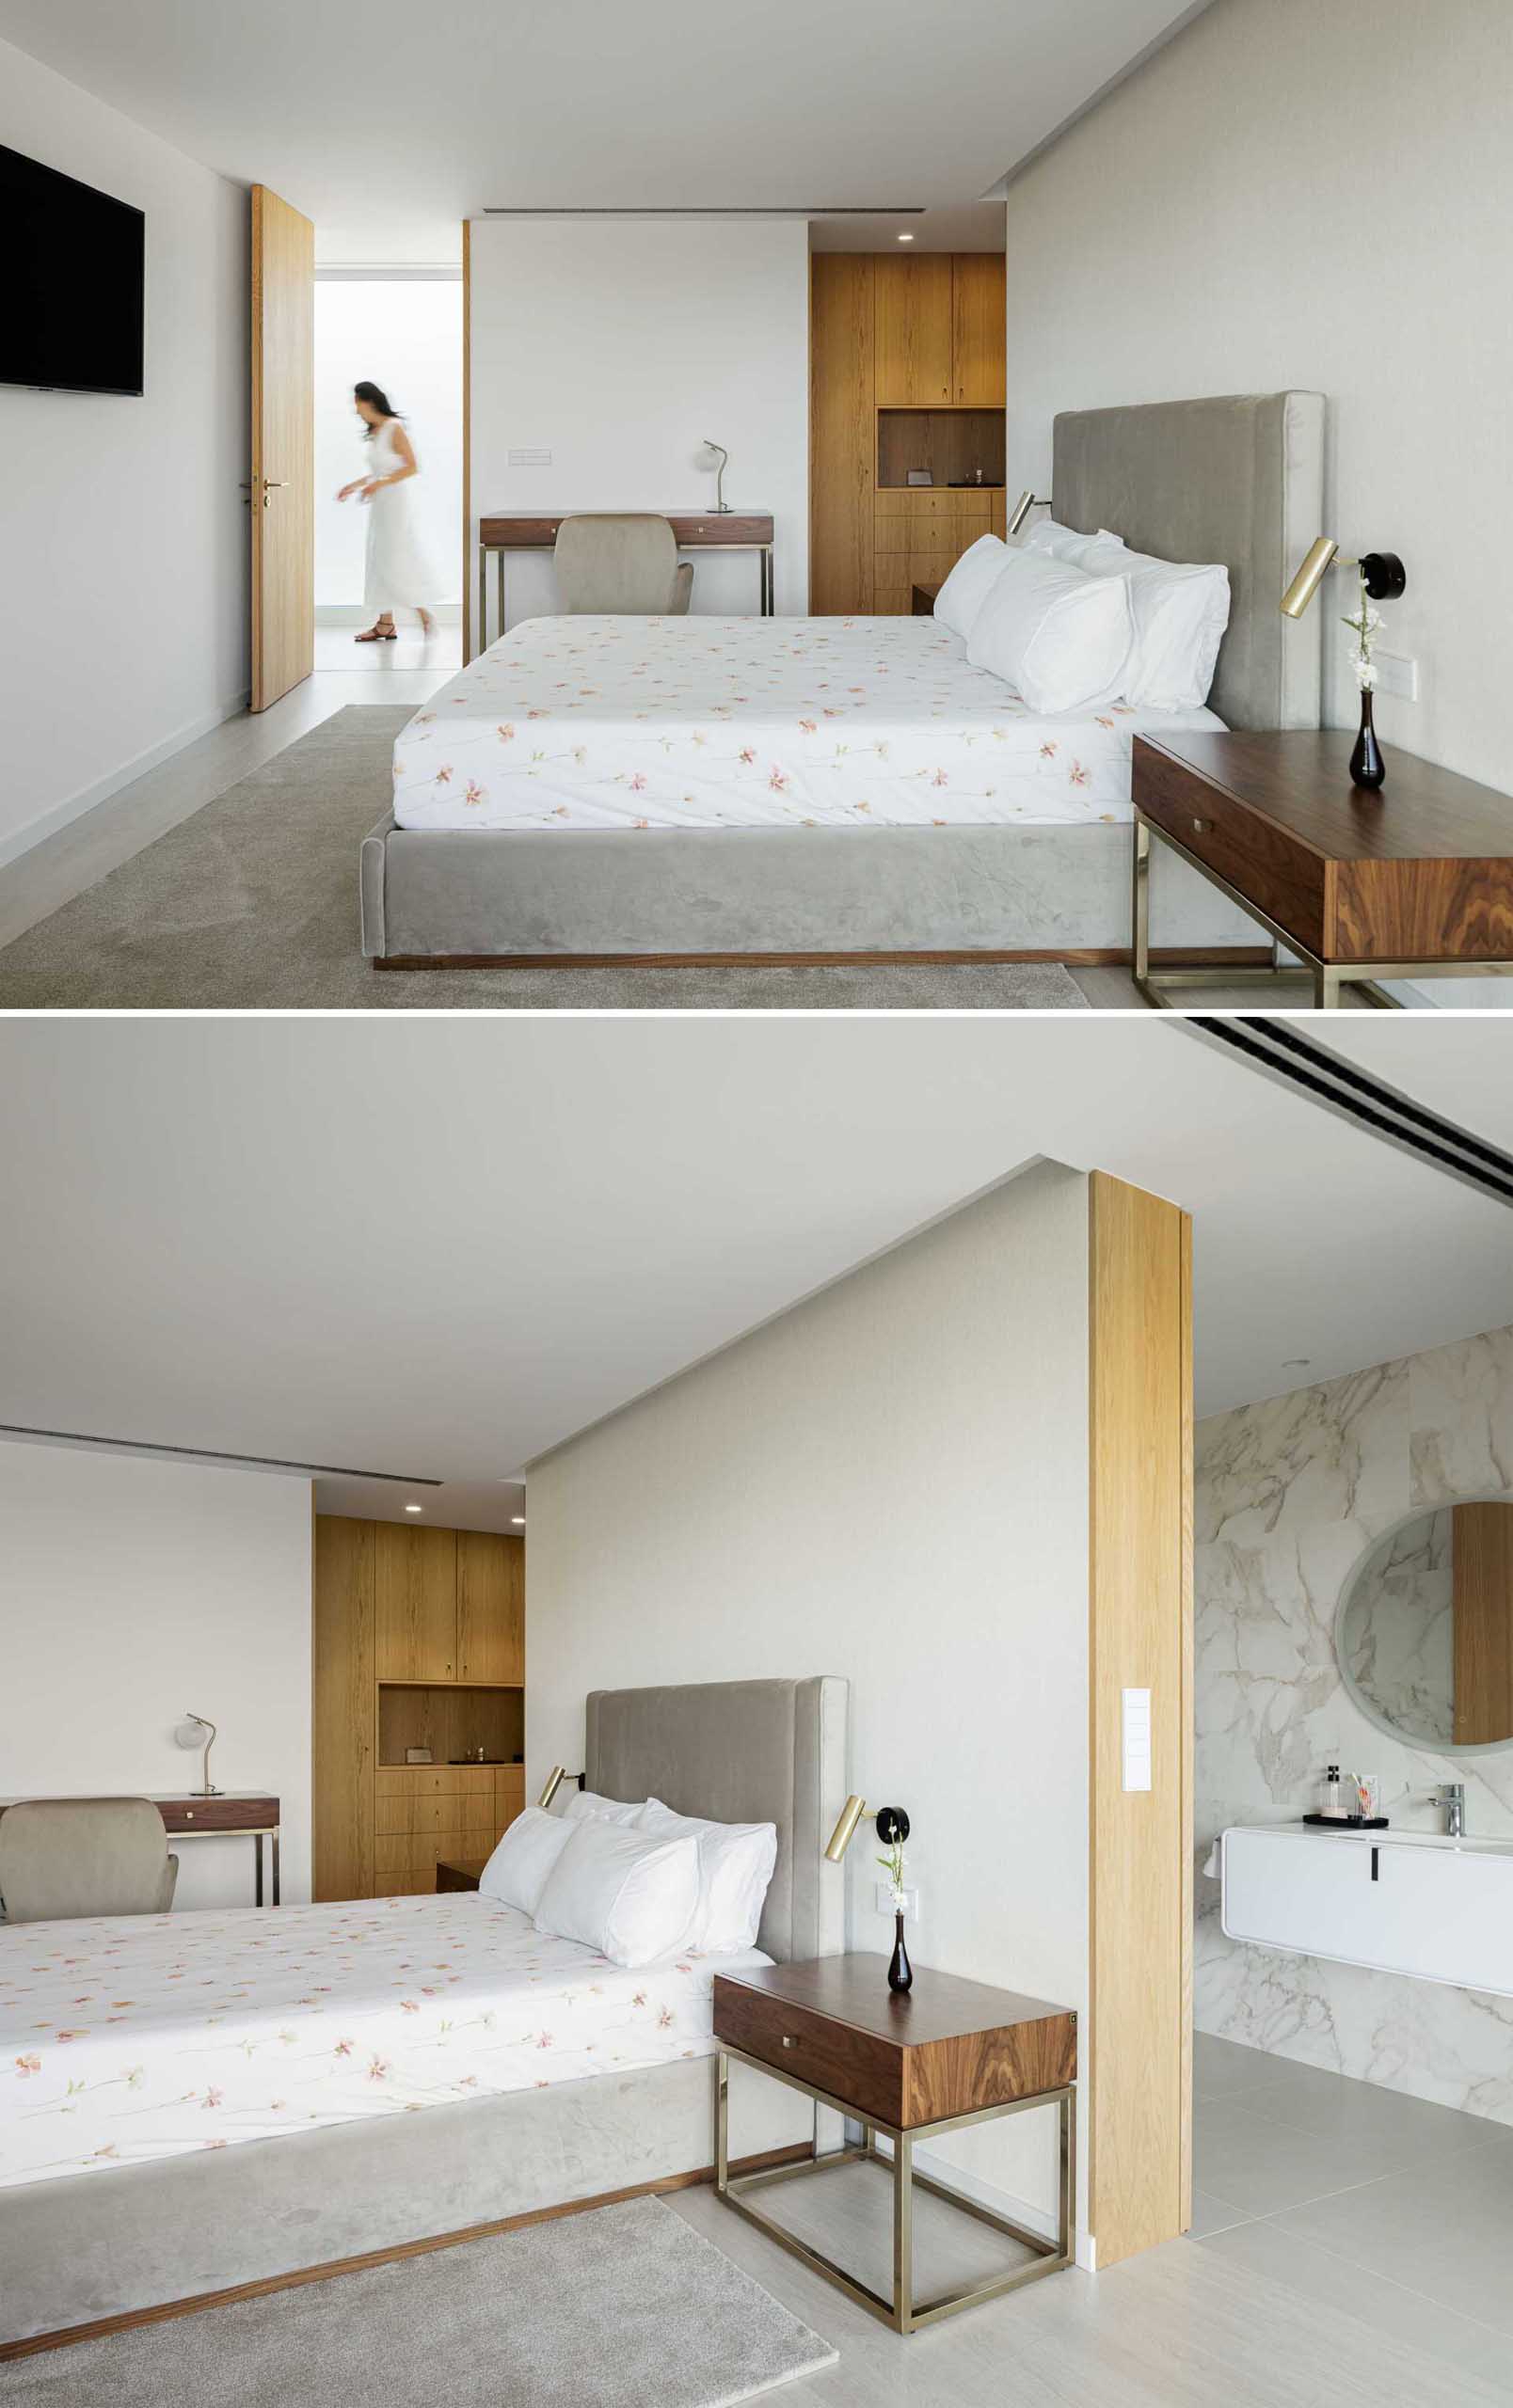 In this modern bedroom a wall separates the sleeping area from the en-suite bathroom. There's also a closet area lined with wood.